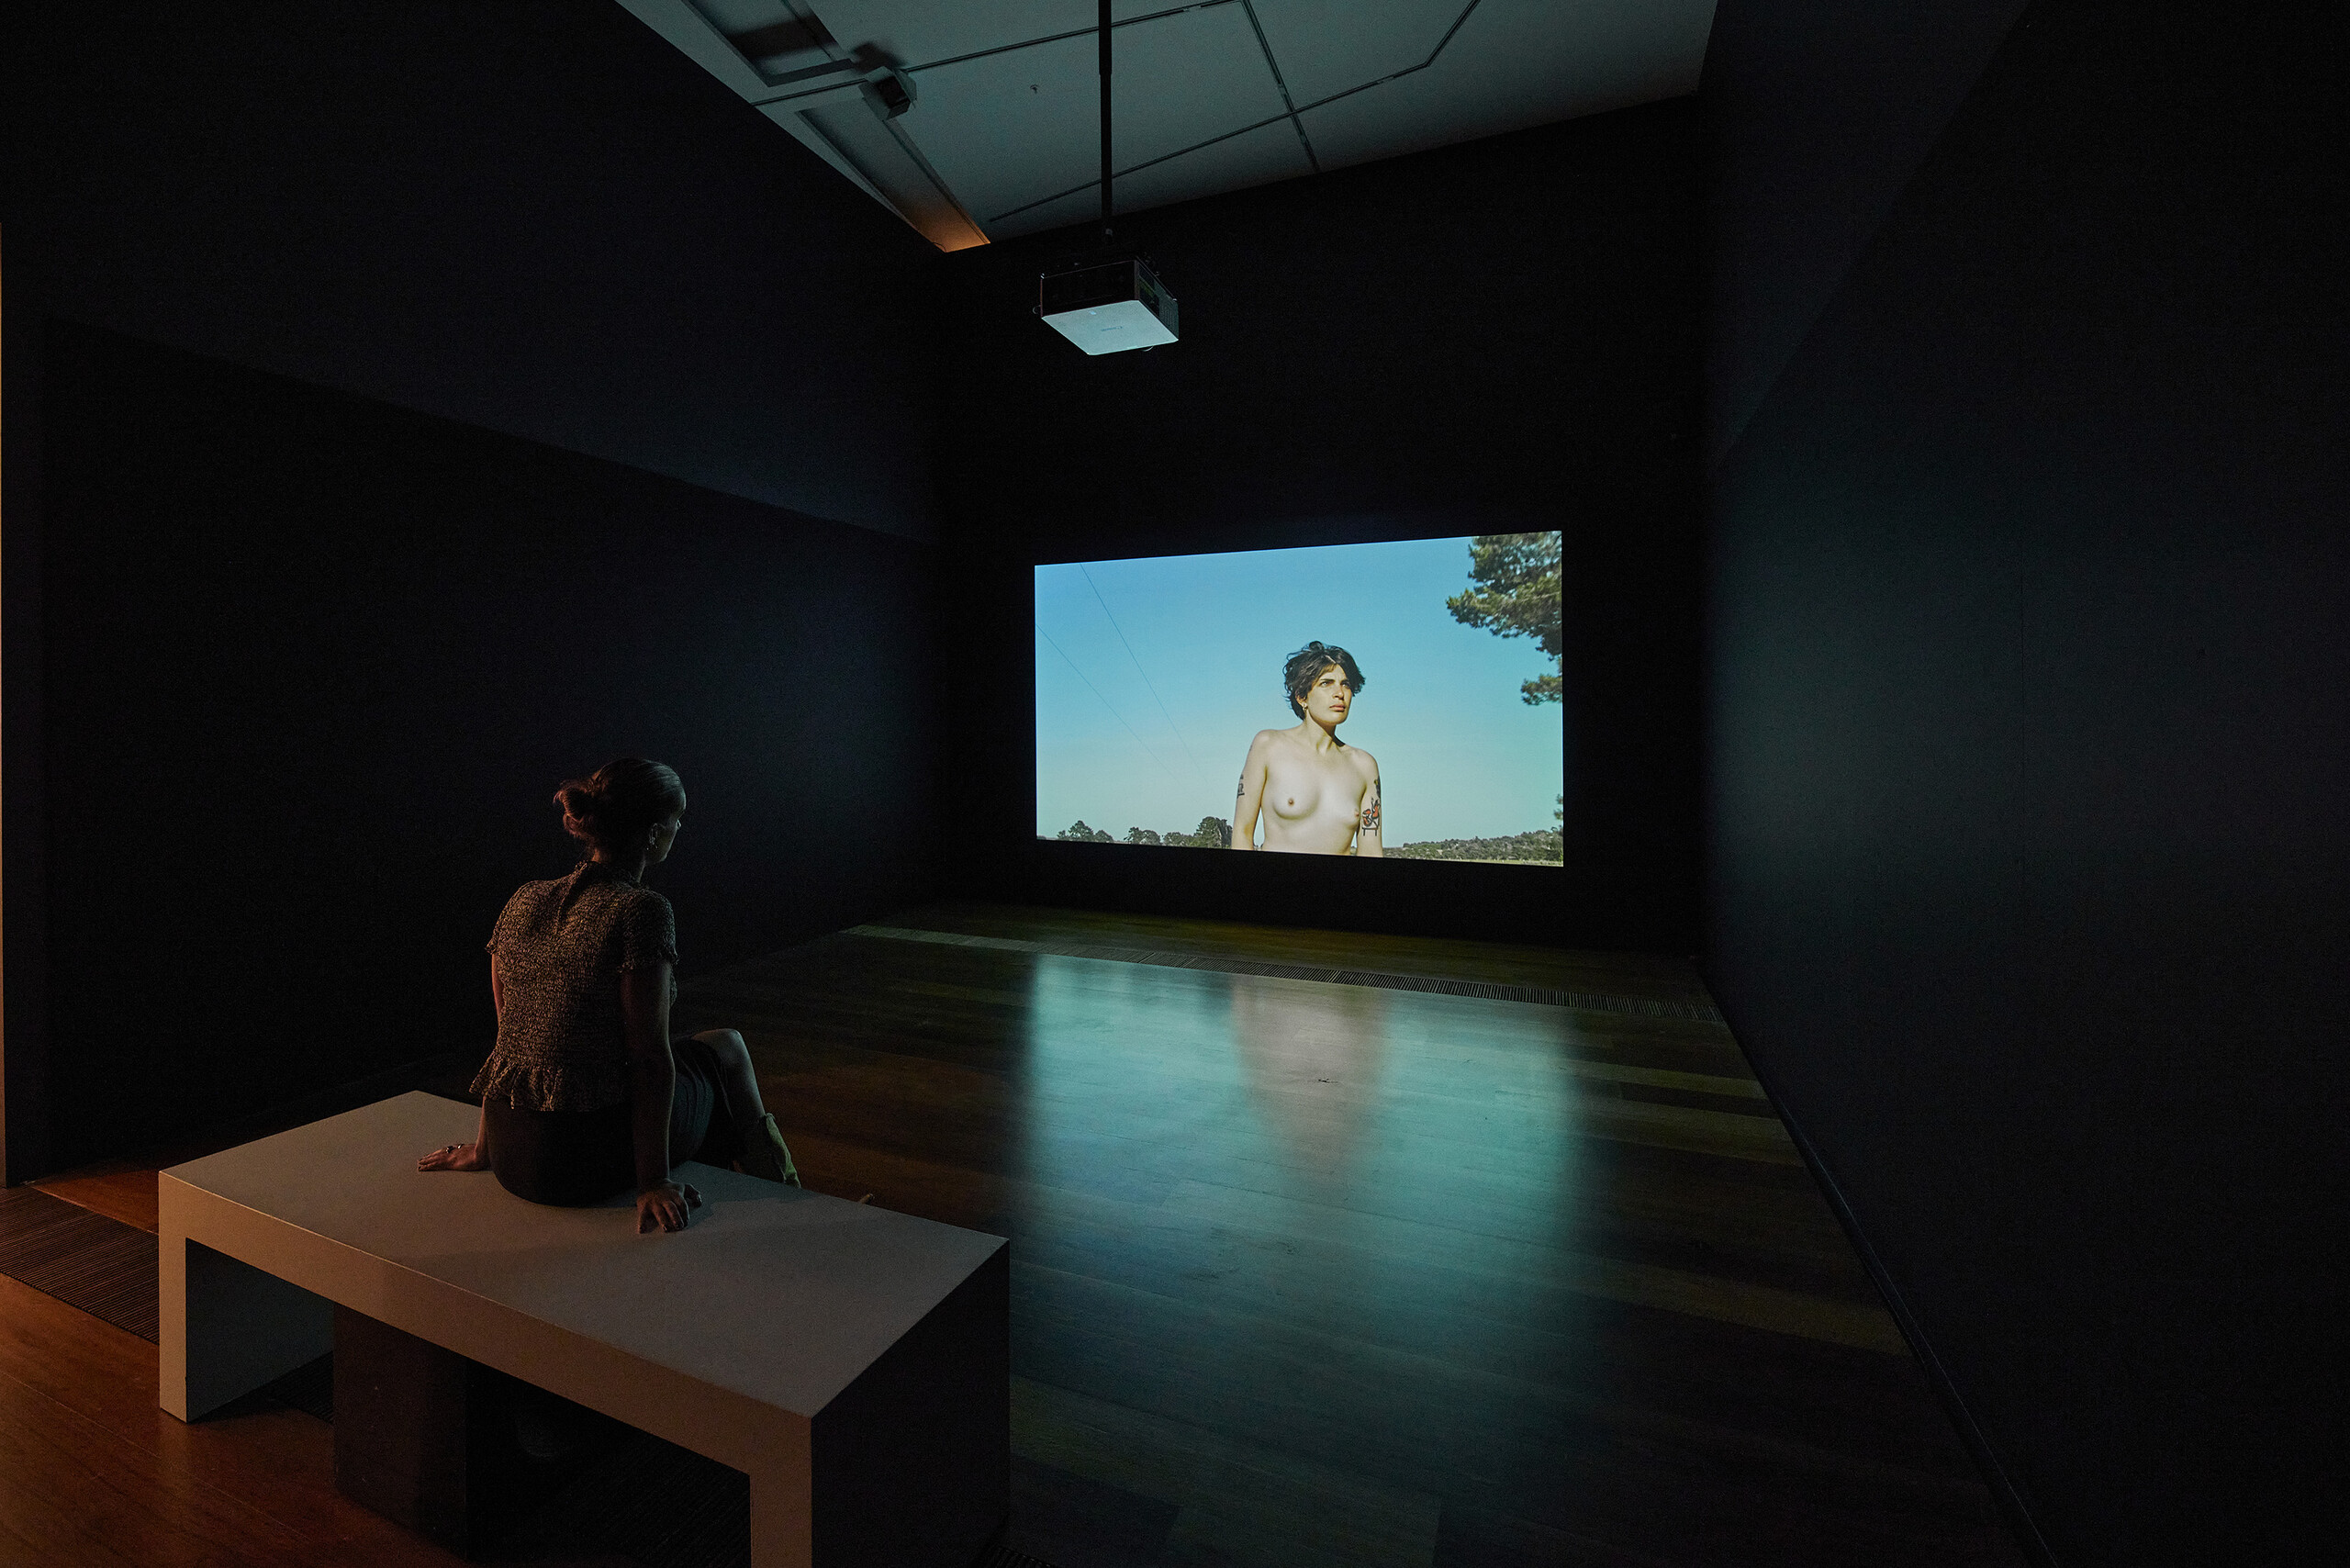 Installation view of Claire Lambe’s Sudden bursts of nasty laughter, 2022-2023 on display as part of the Melbourne Now exhibition at The Ian Potter Centre: NGV Australia, Melbourne from 24 March to 20 August 2023. Photo: Sean Fenness